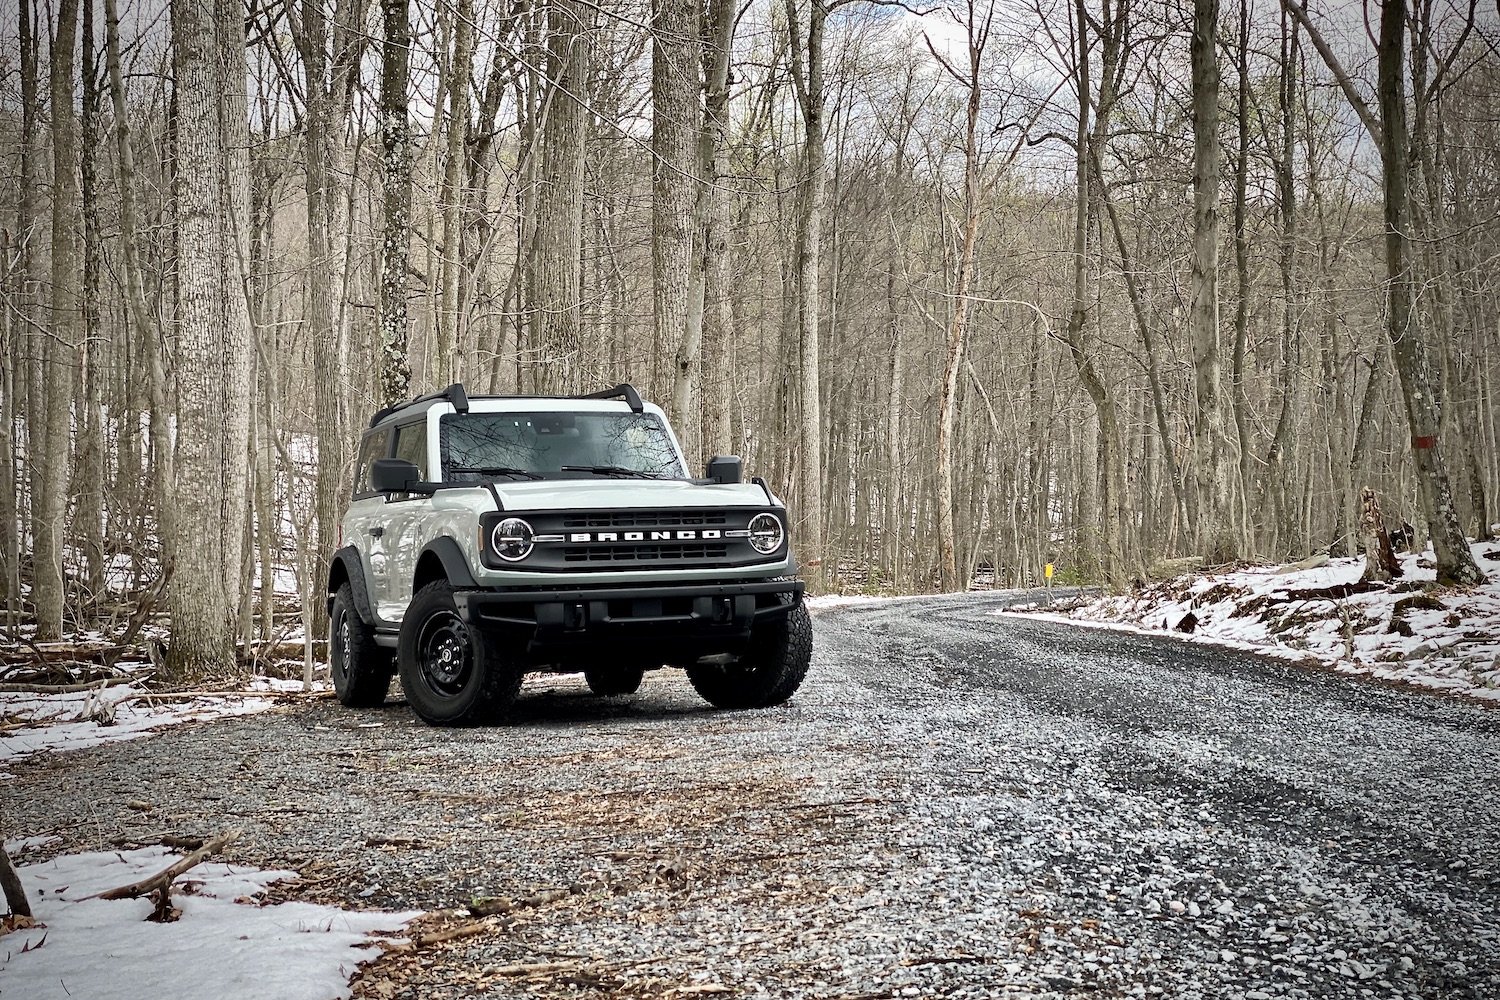 Front end angle of 2021 Ford Bronco from passenger side on a gravel trail with trees in the back on a cloudy day.